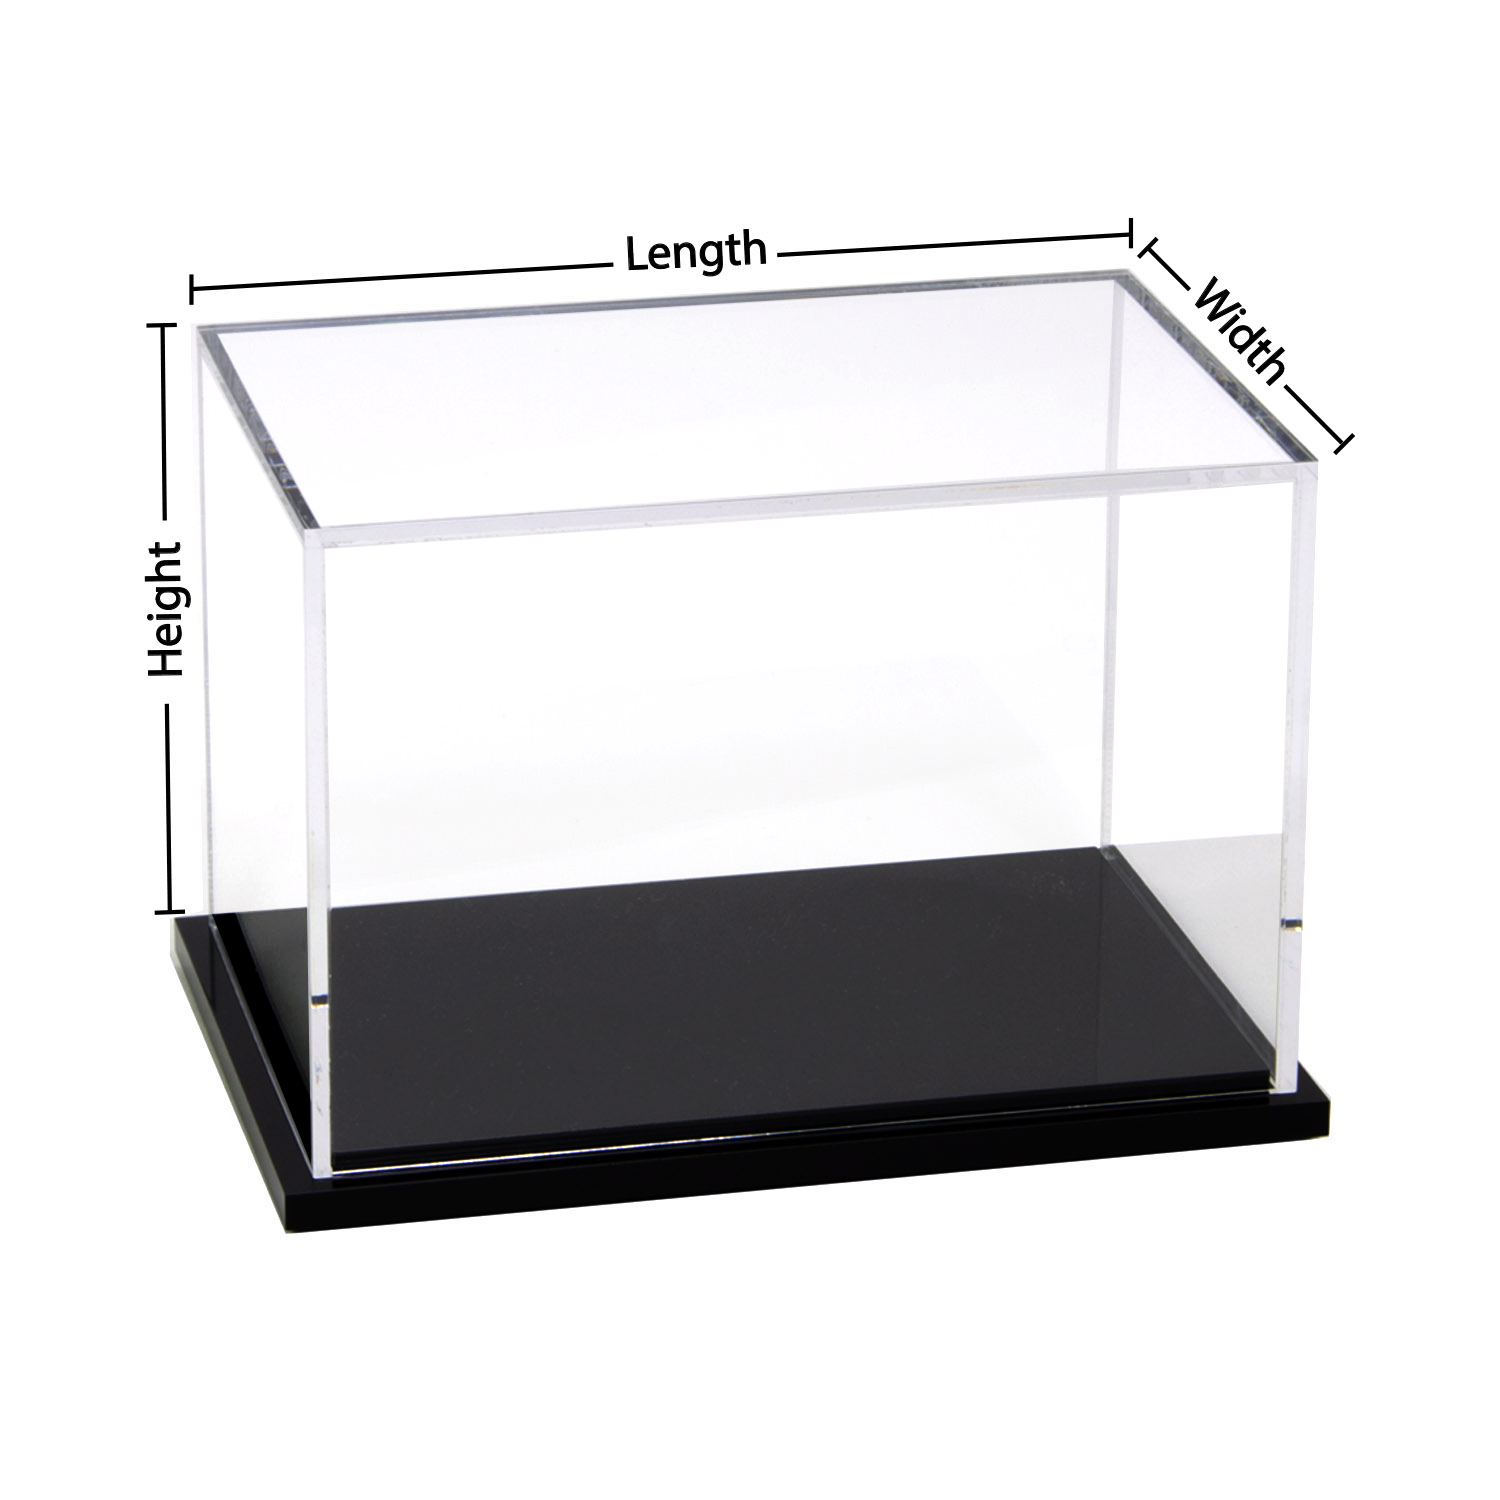 Clear Stands White Large Square Acrylic Display Cube, 14 Inch - ClearStands